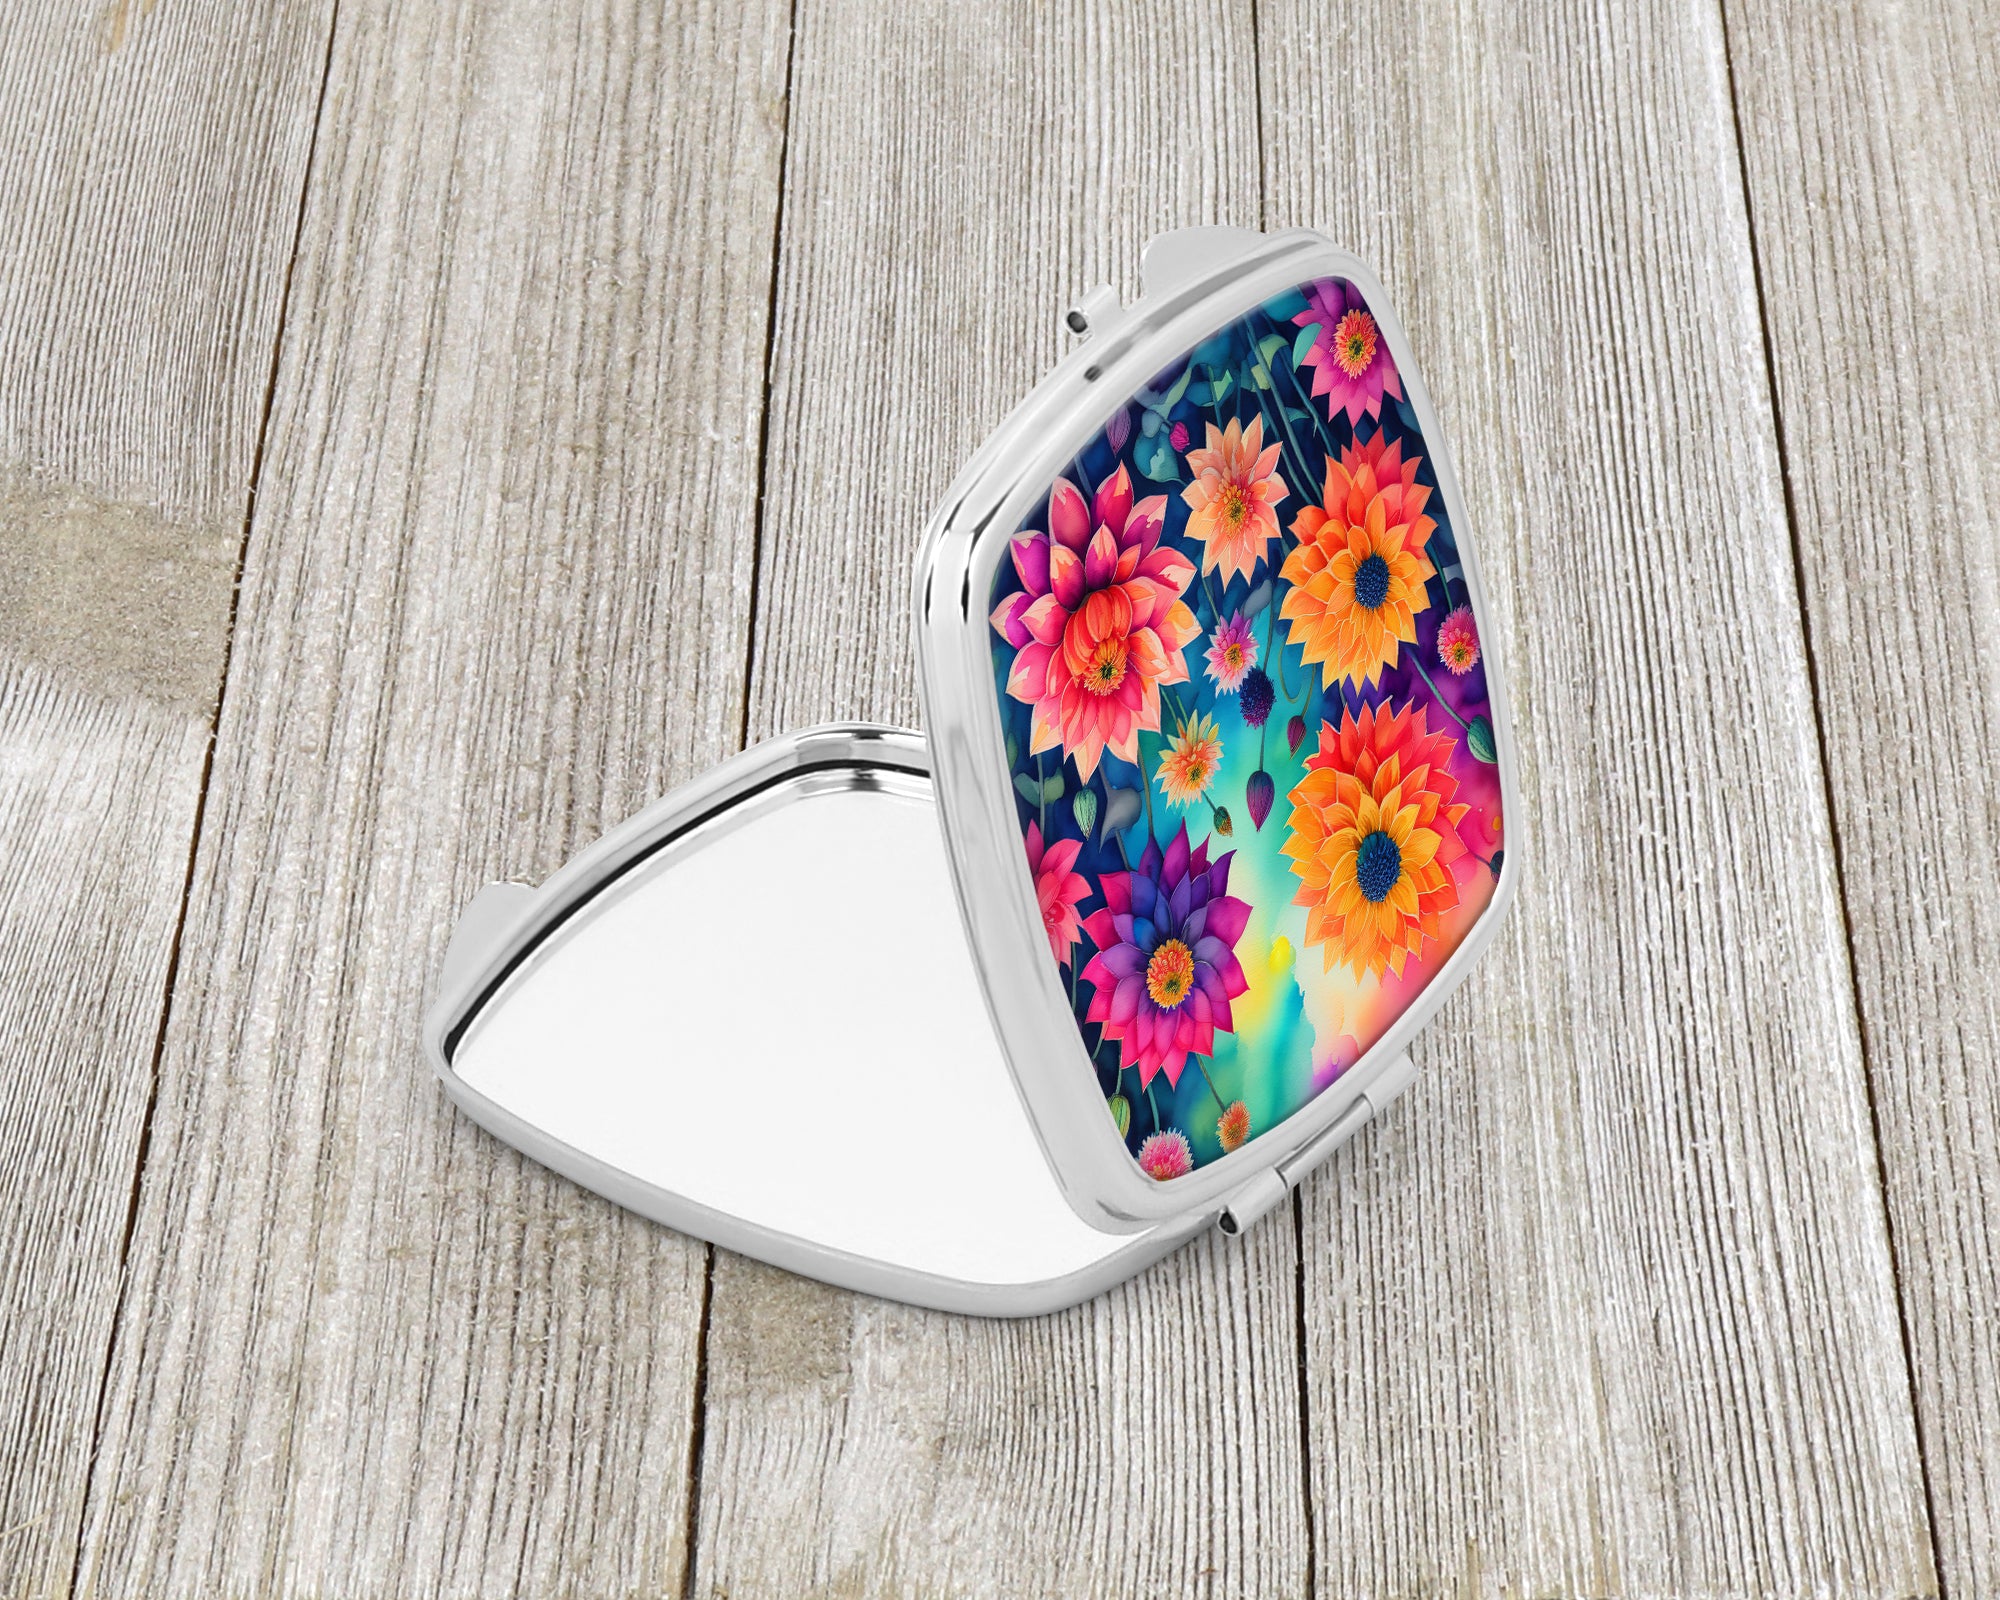 Buy this Colorful Dahlias Compact Mirror